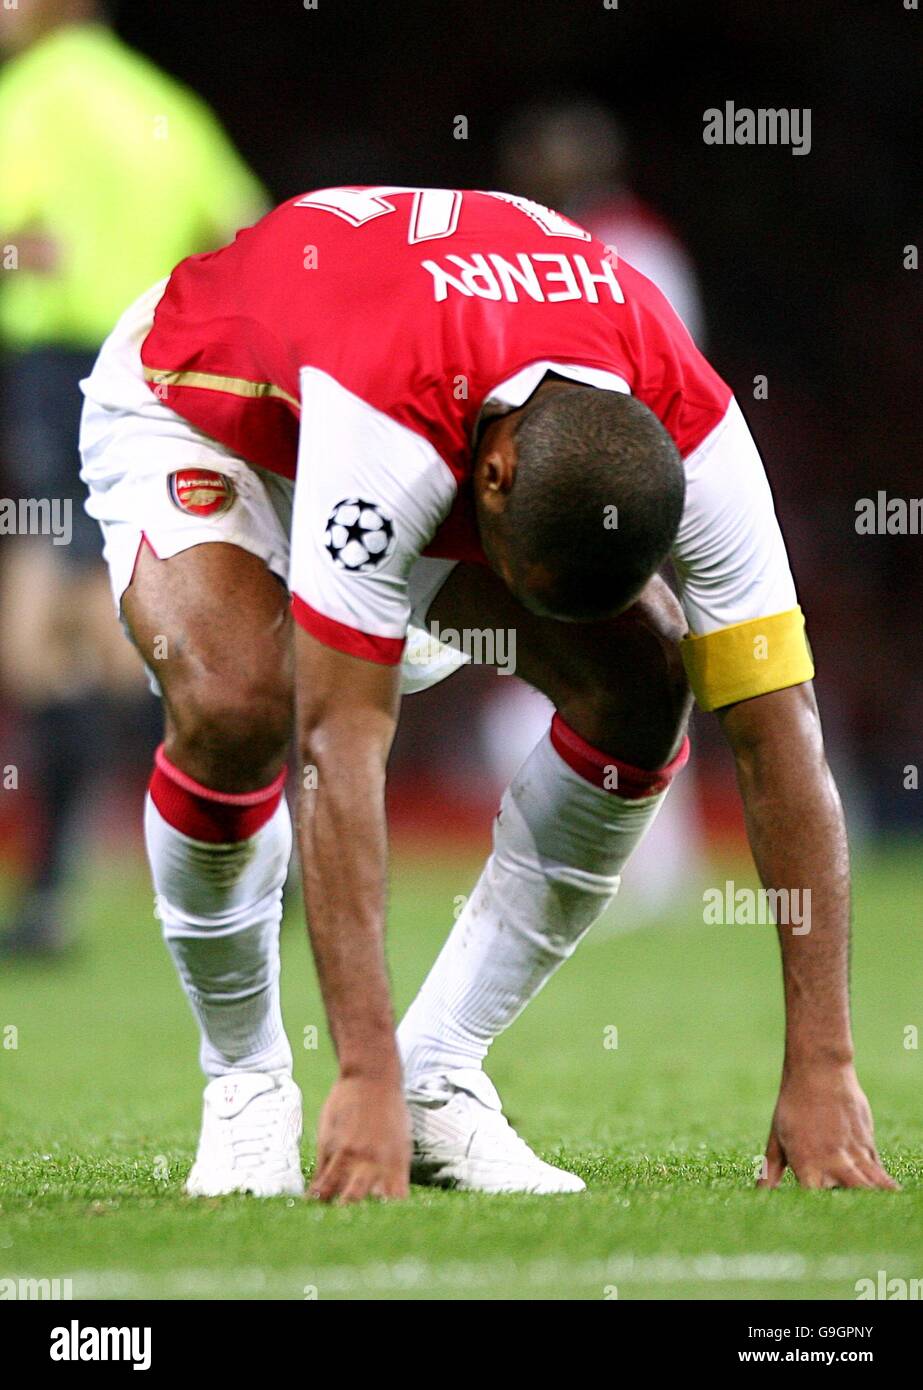 AS Monaco's Manager Thierry Henry Stock Photo - Alamy